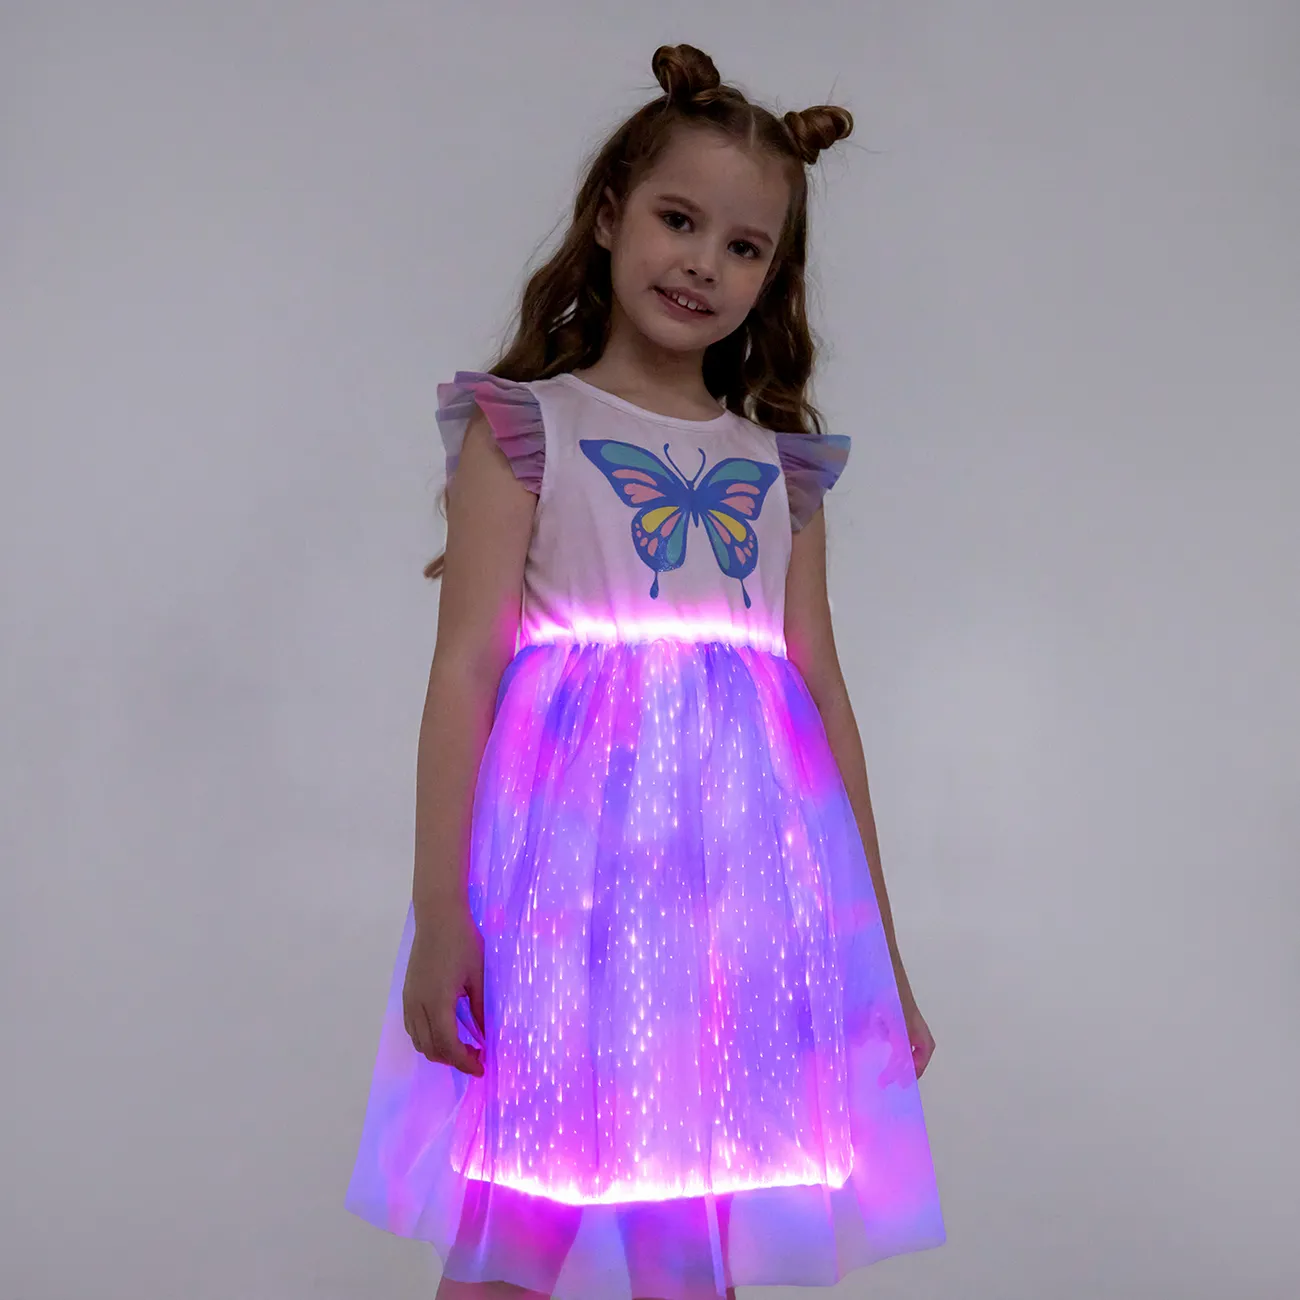 Go-Glow Illuminating Butterfly Dress With Light Up Skirt Including Controller (Built-In Battery) Multi-color big image 1